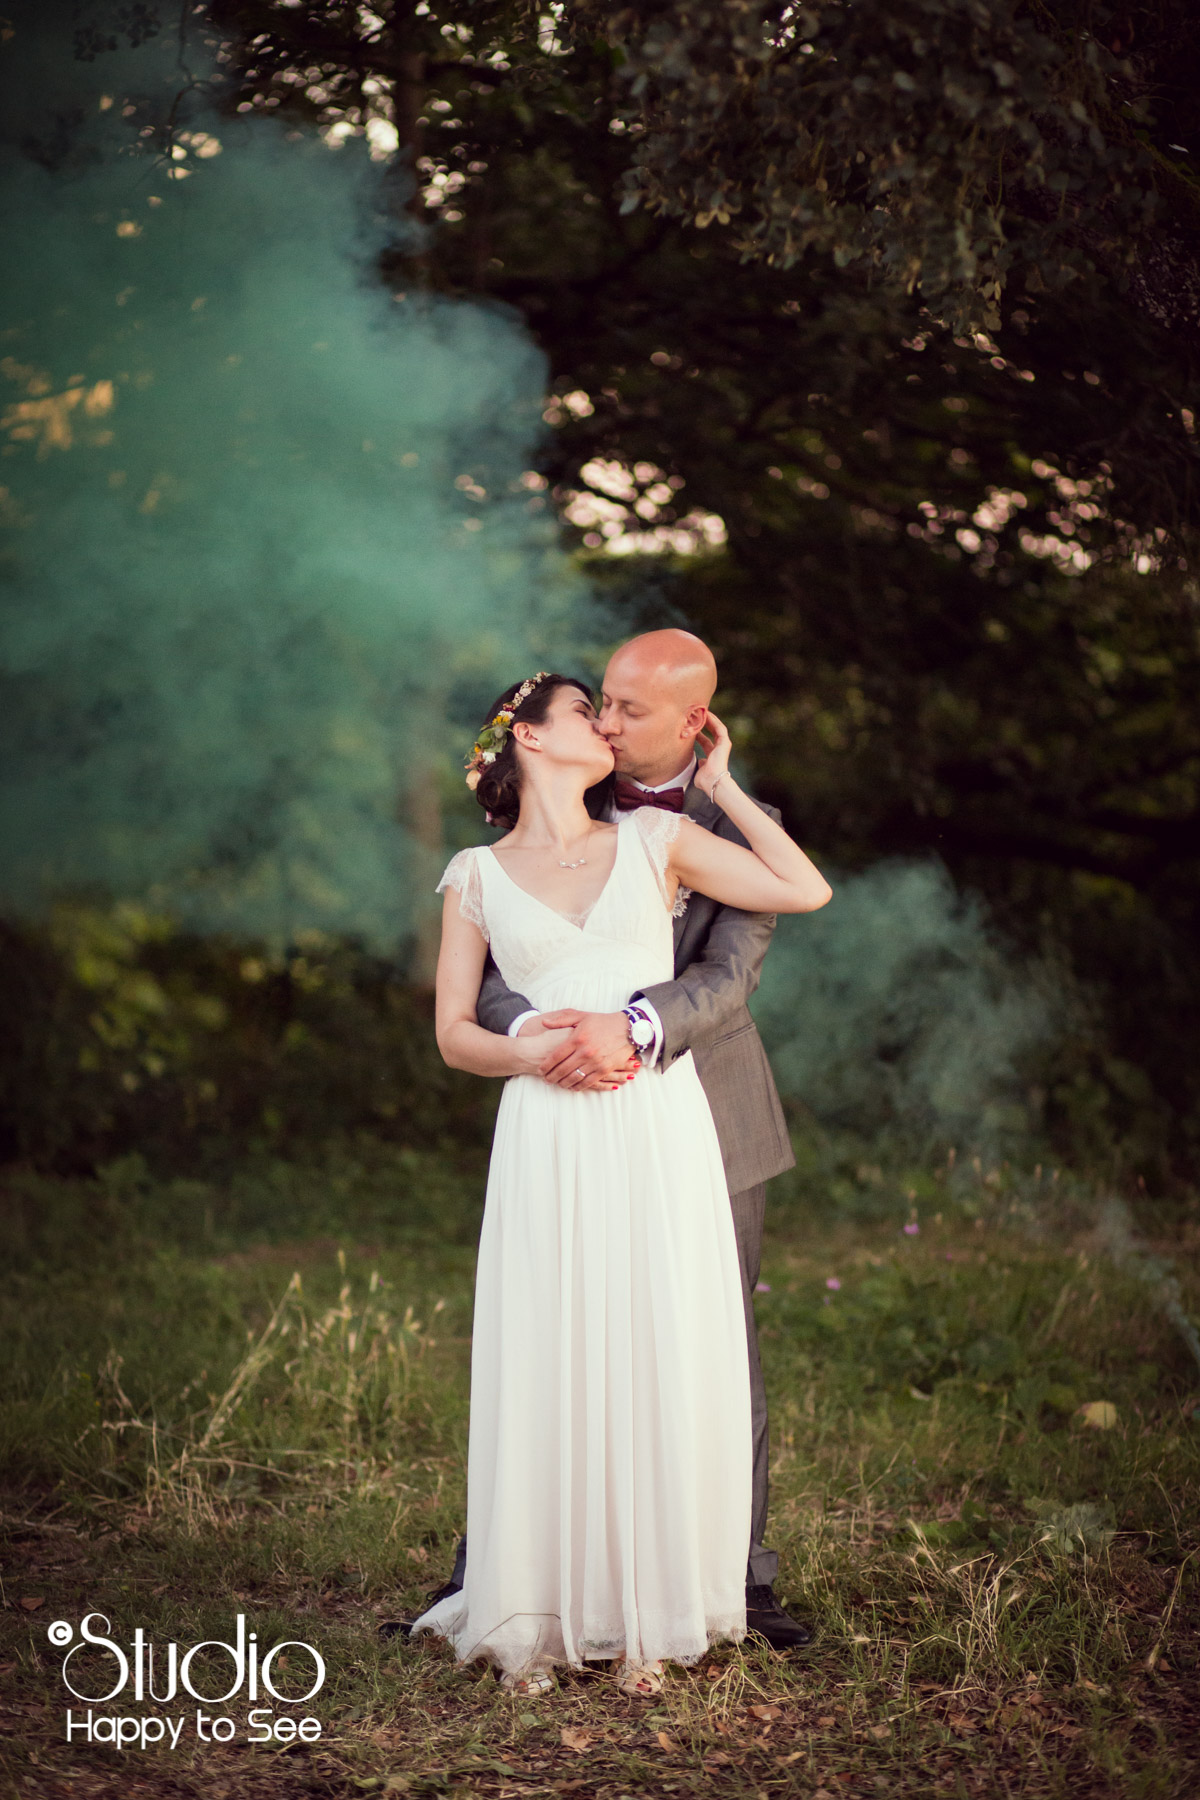  Mariage funky toulouse fumigenes